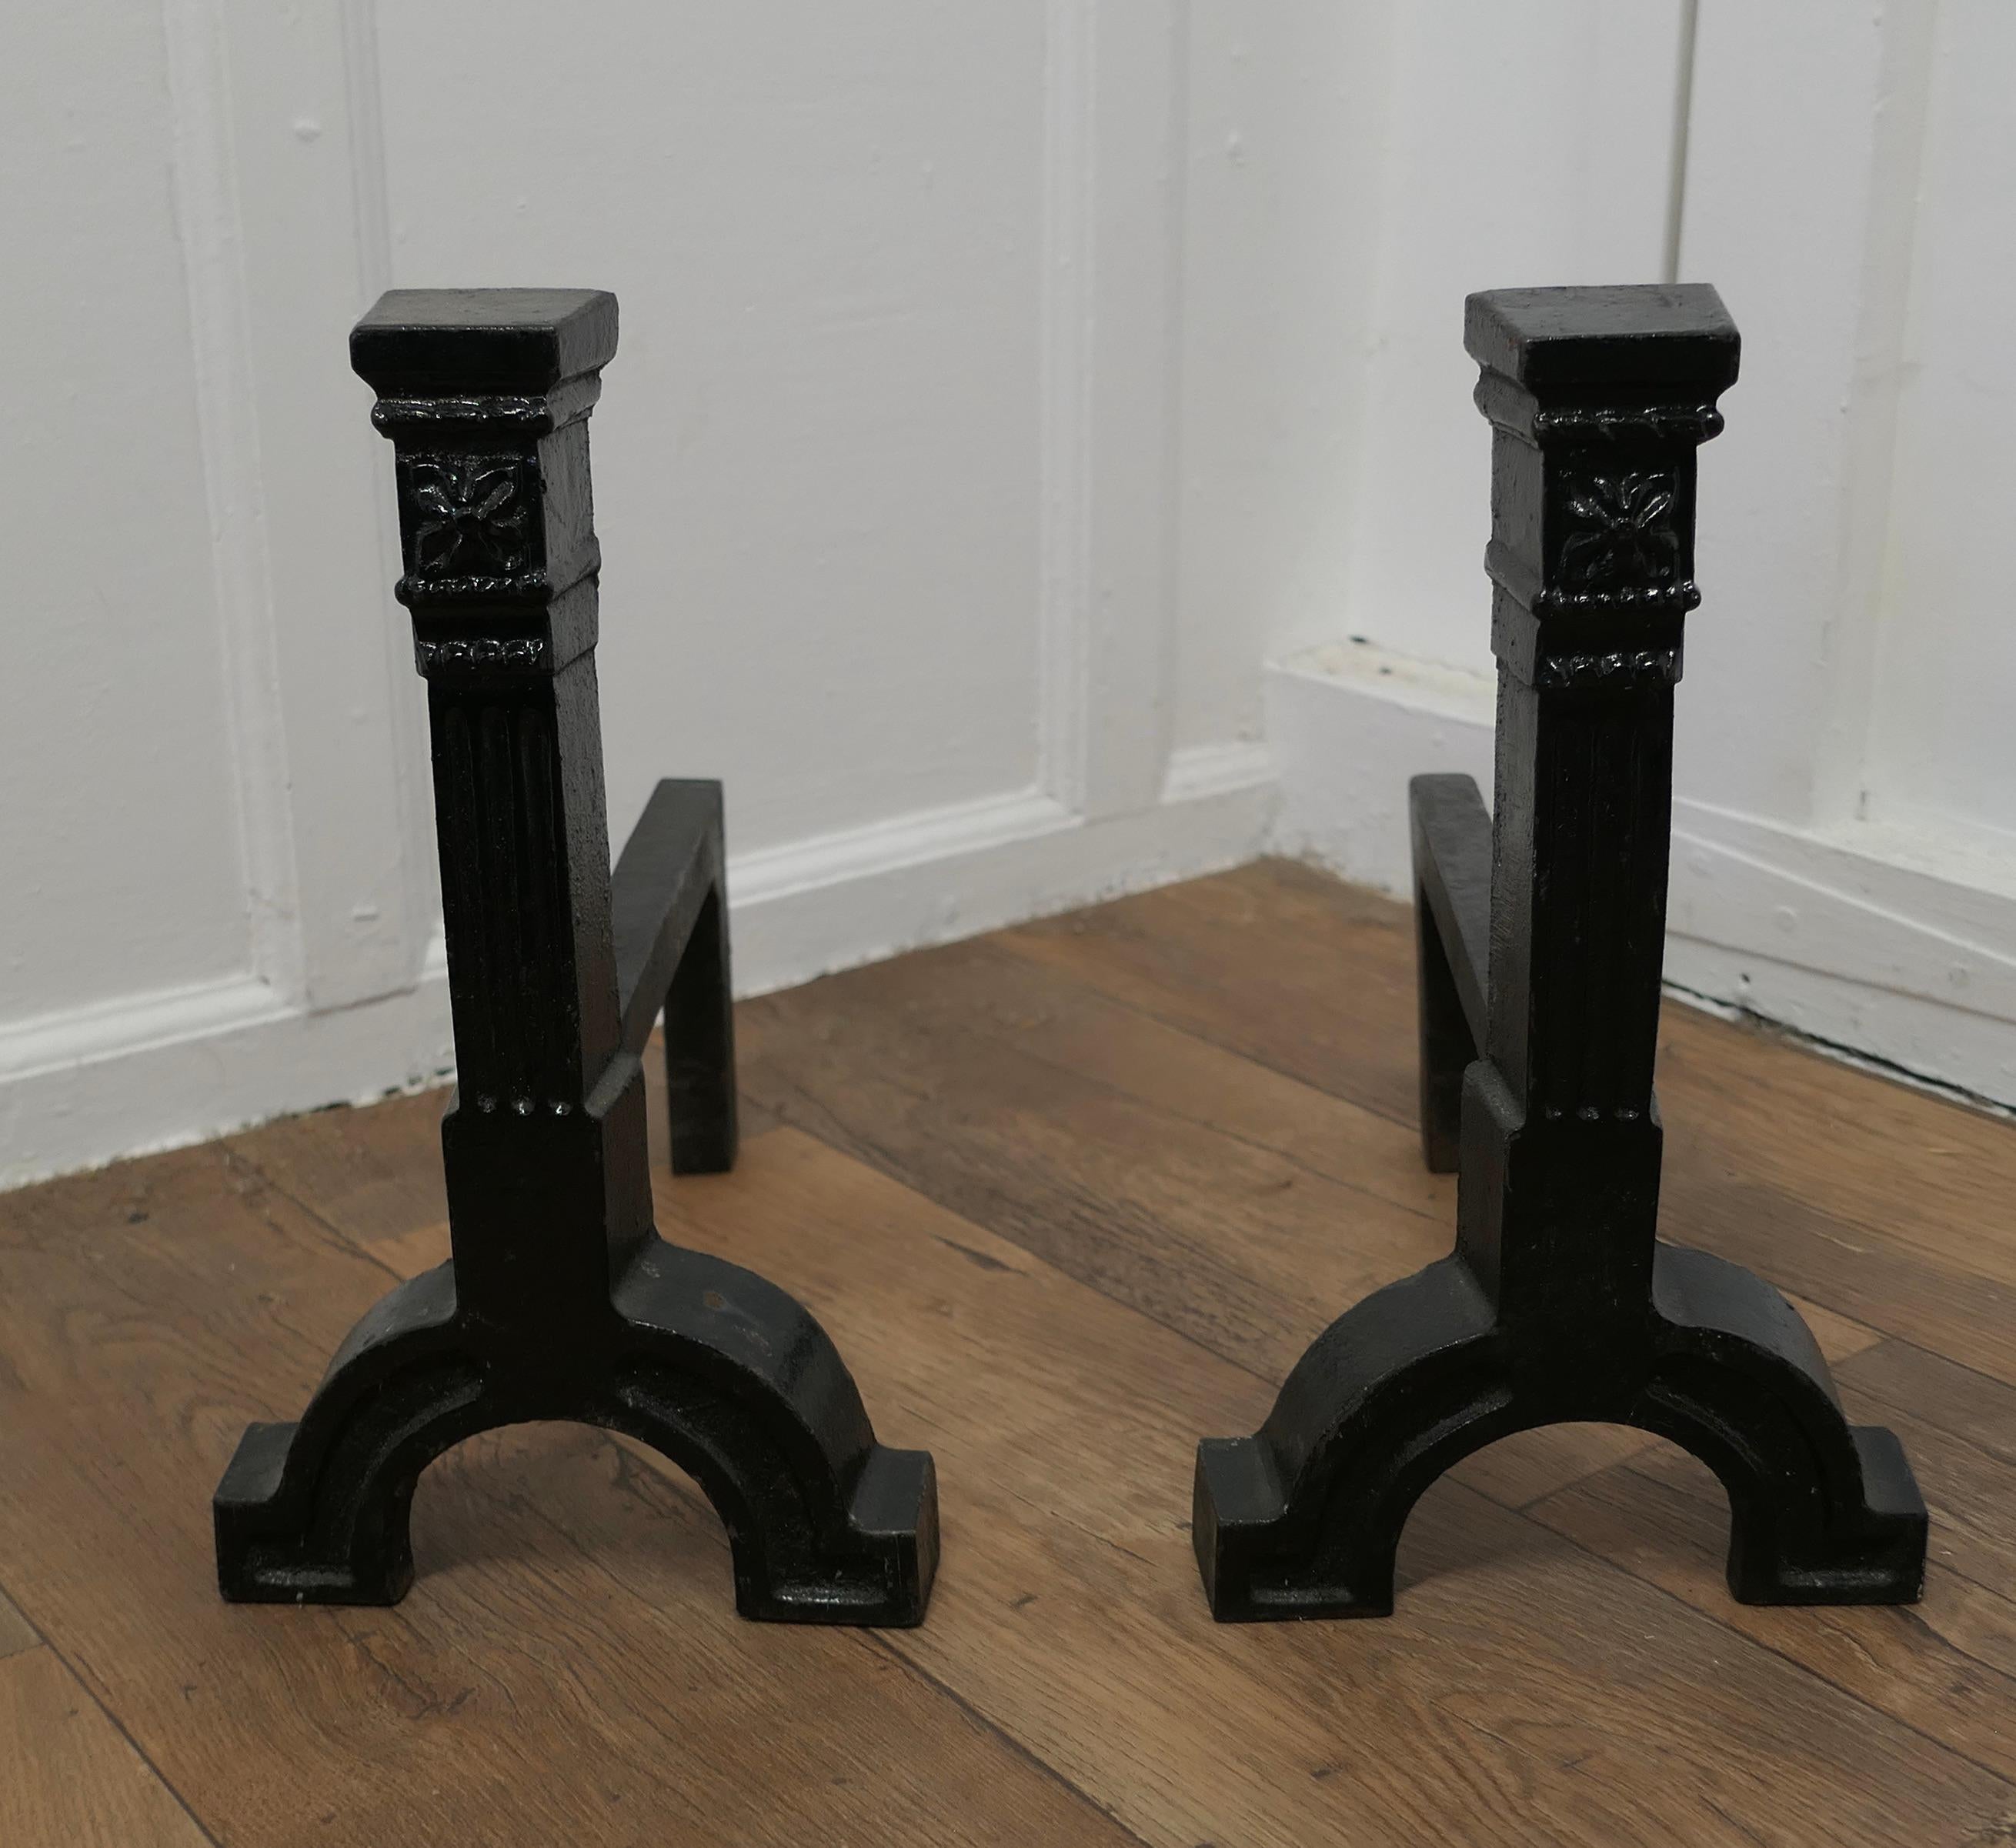 A Very Heavy Pair of 19th Century Iron Andirons or Fire Dogs

This is a Very Heavy pair of Andirons and they are made of cast iron 
The Andirons are 15” high, 14” long and are 8.5” wide at the front
TMS199